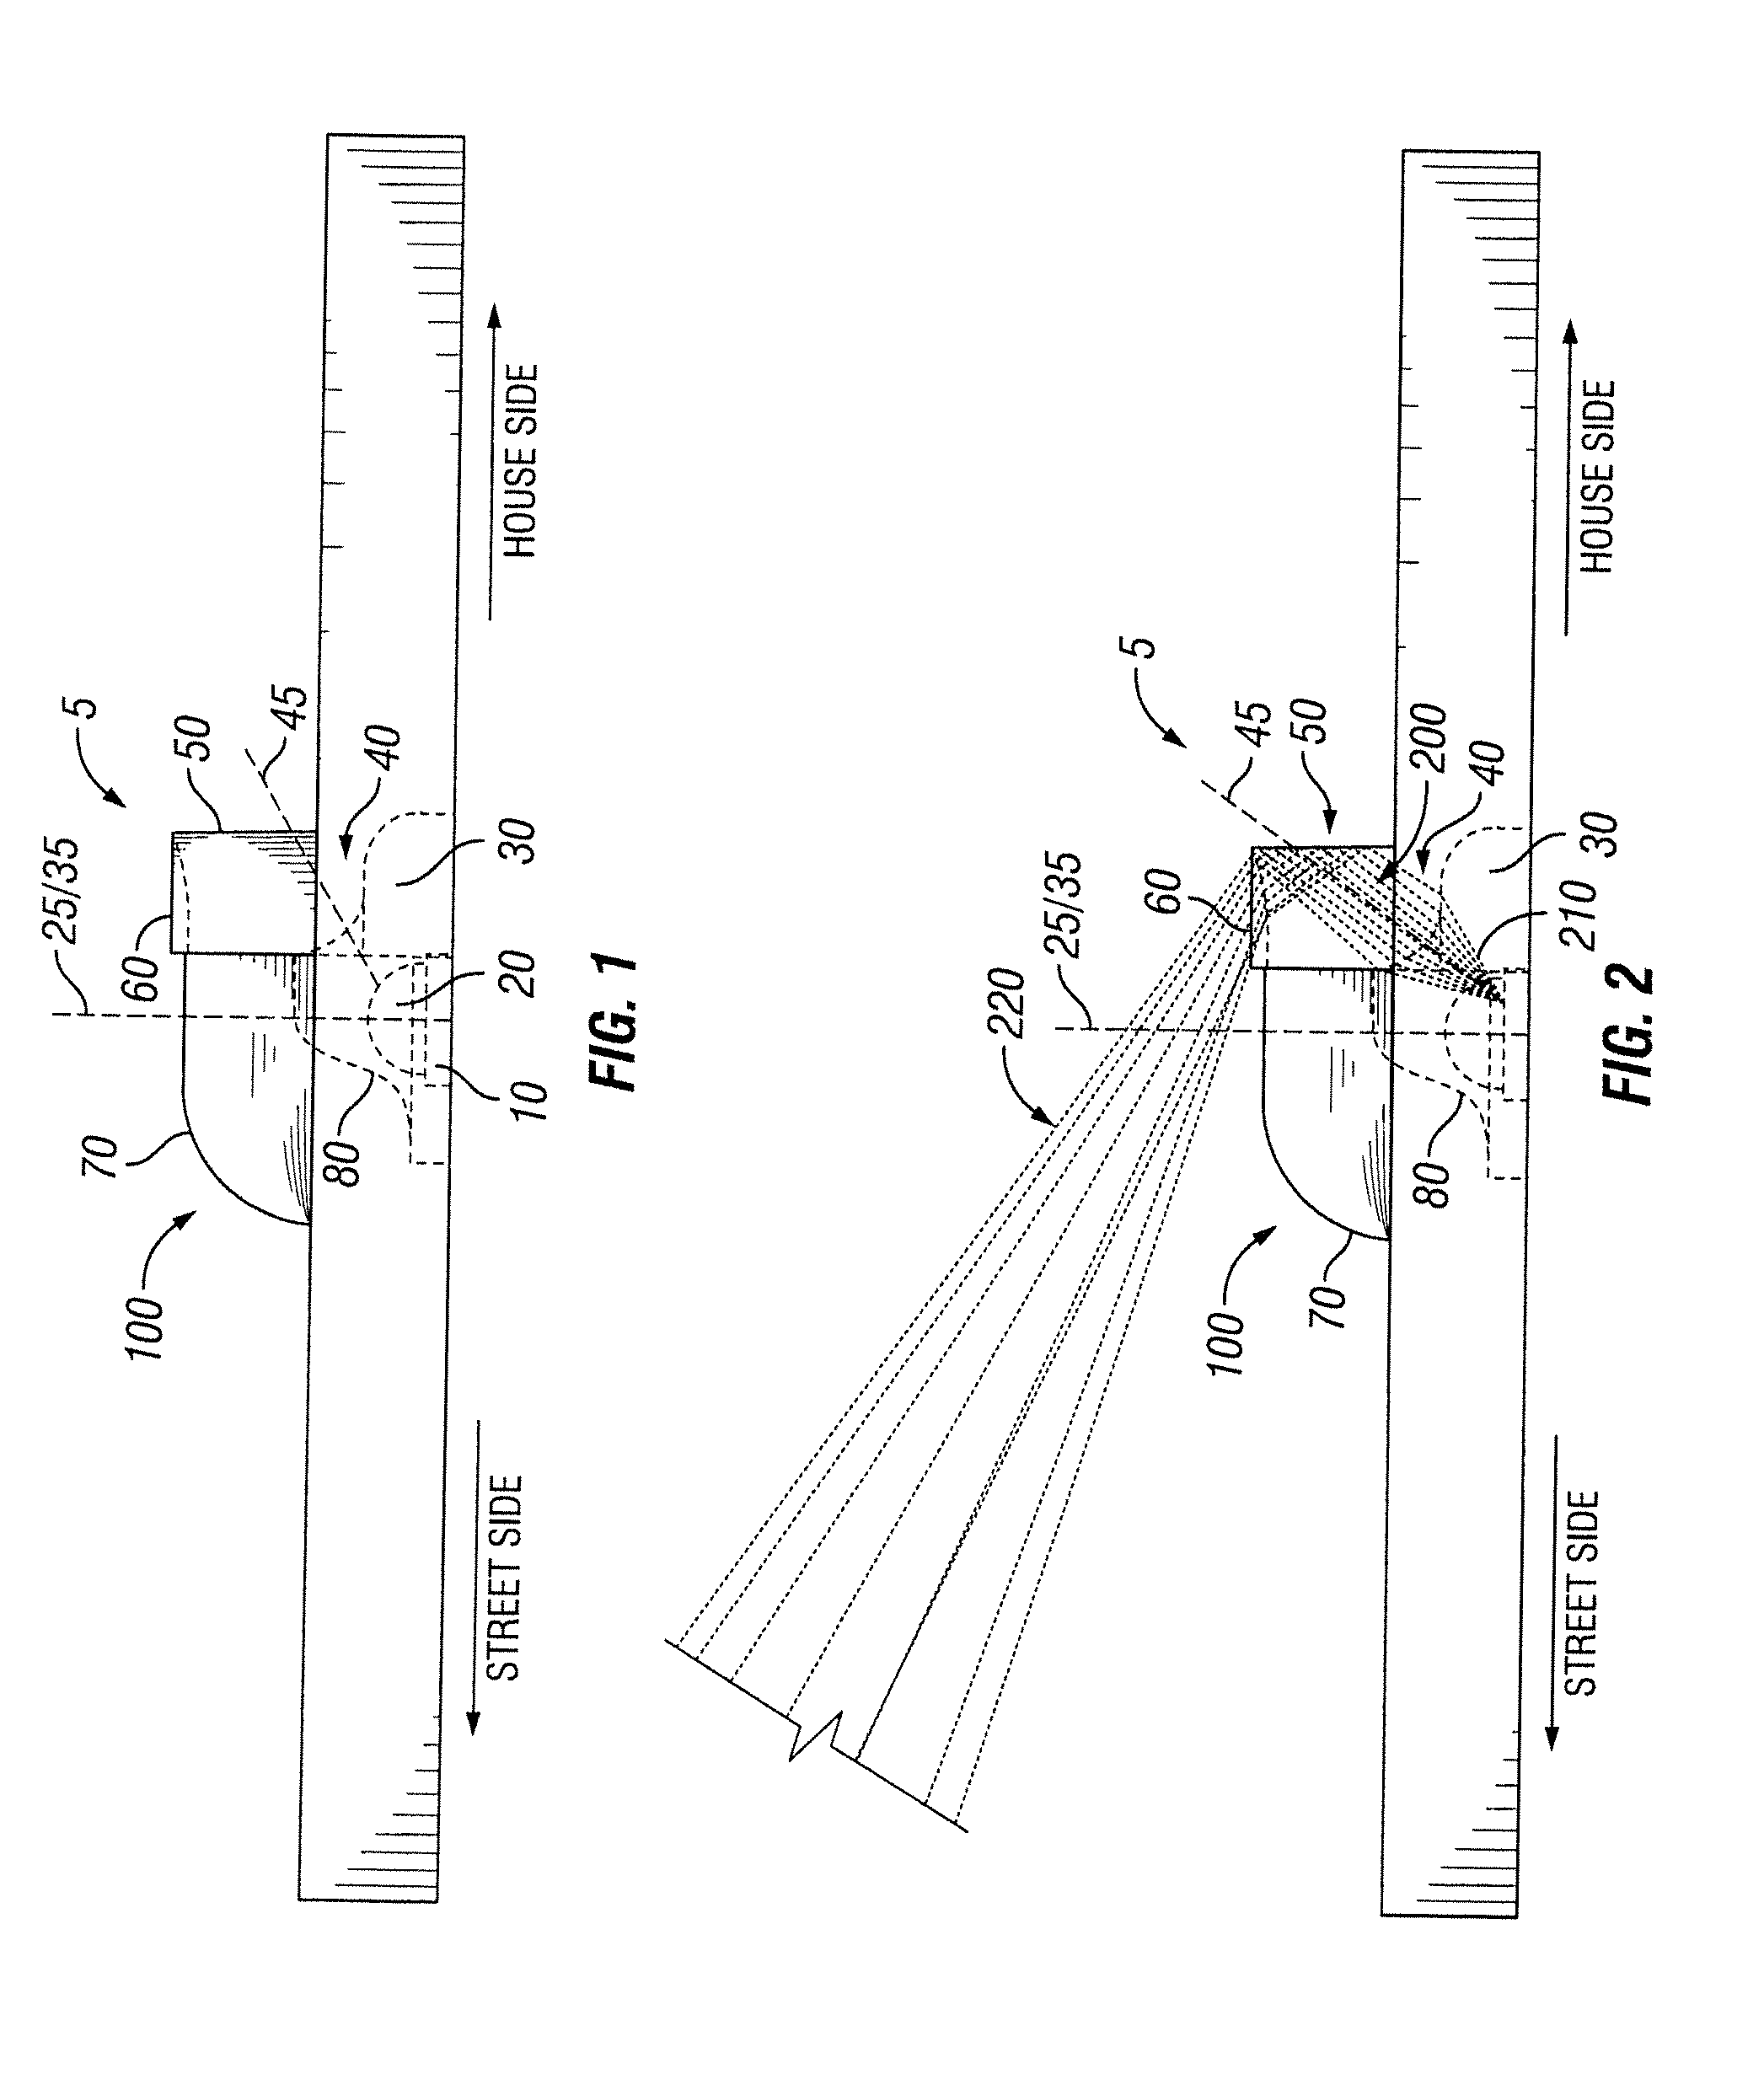 Method and system for managing light from a light emitting diode